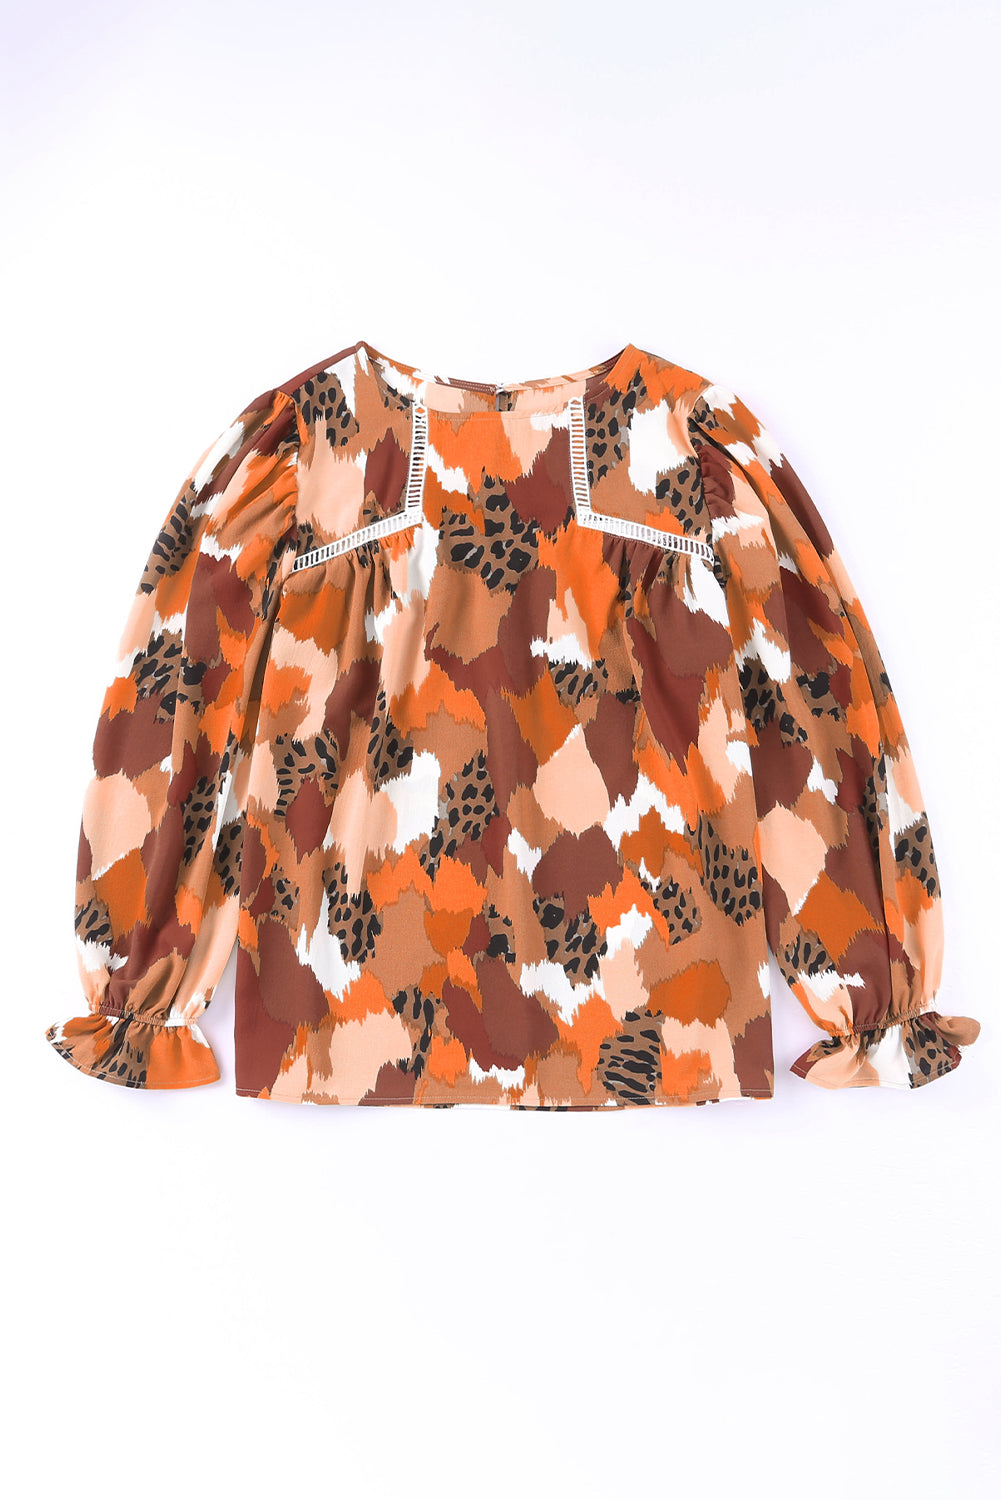 Abstract Printed Long Sleeve Blouse